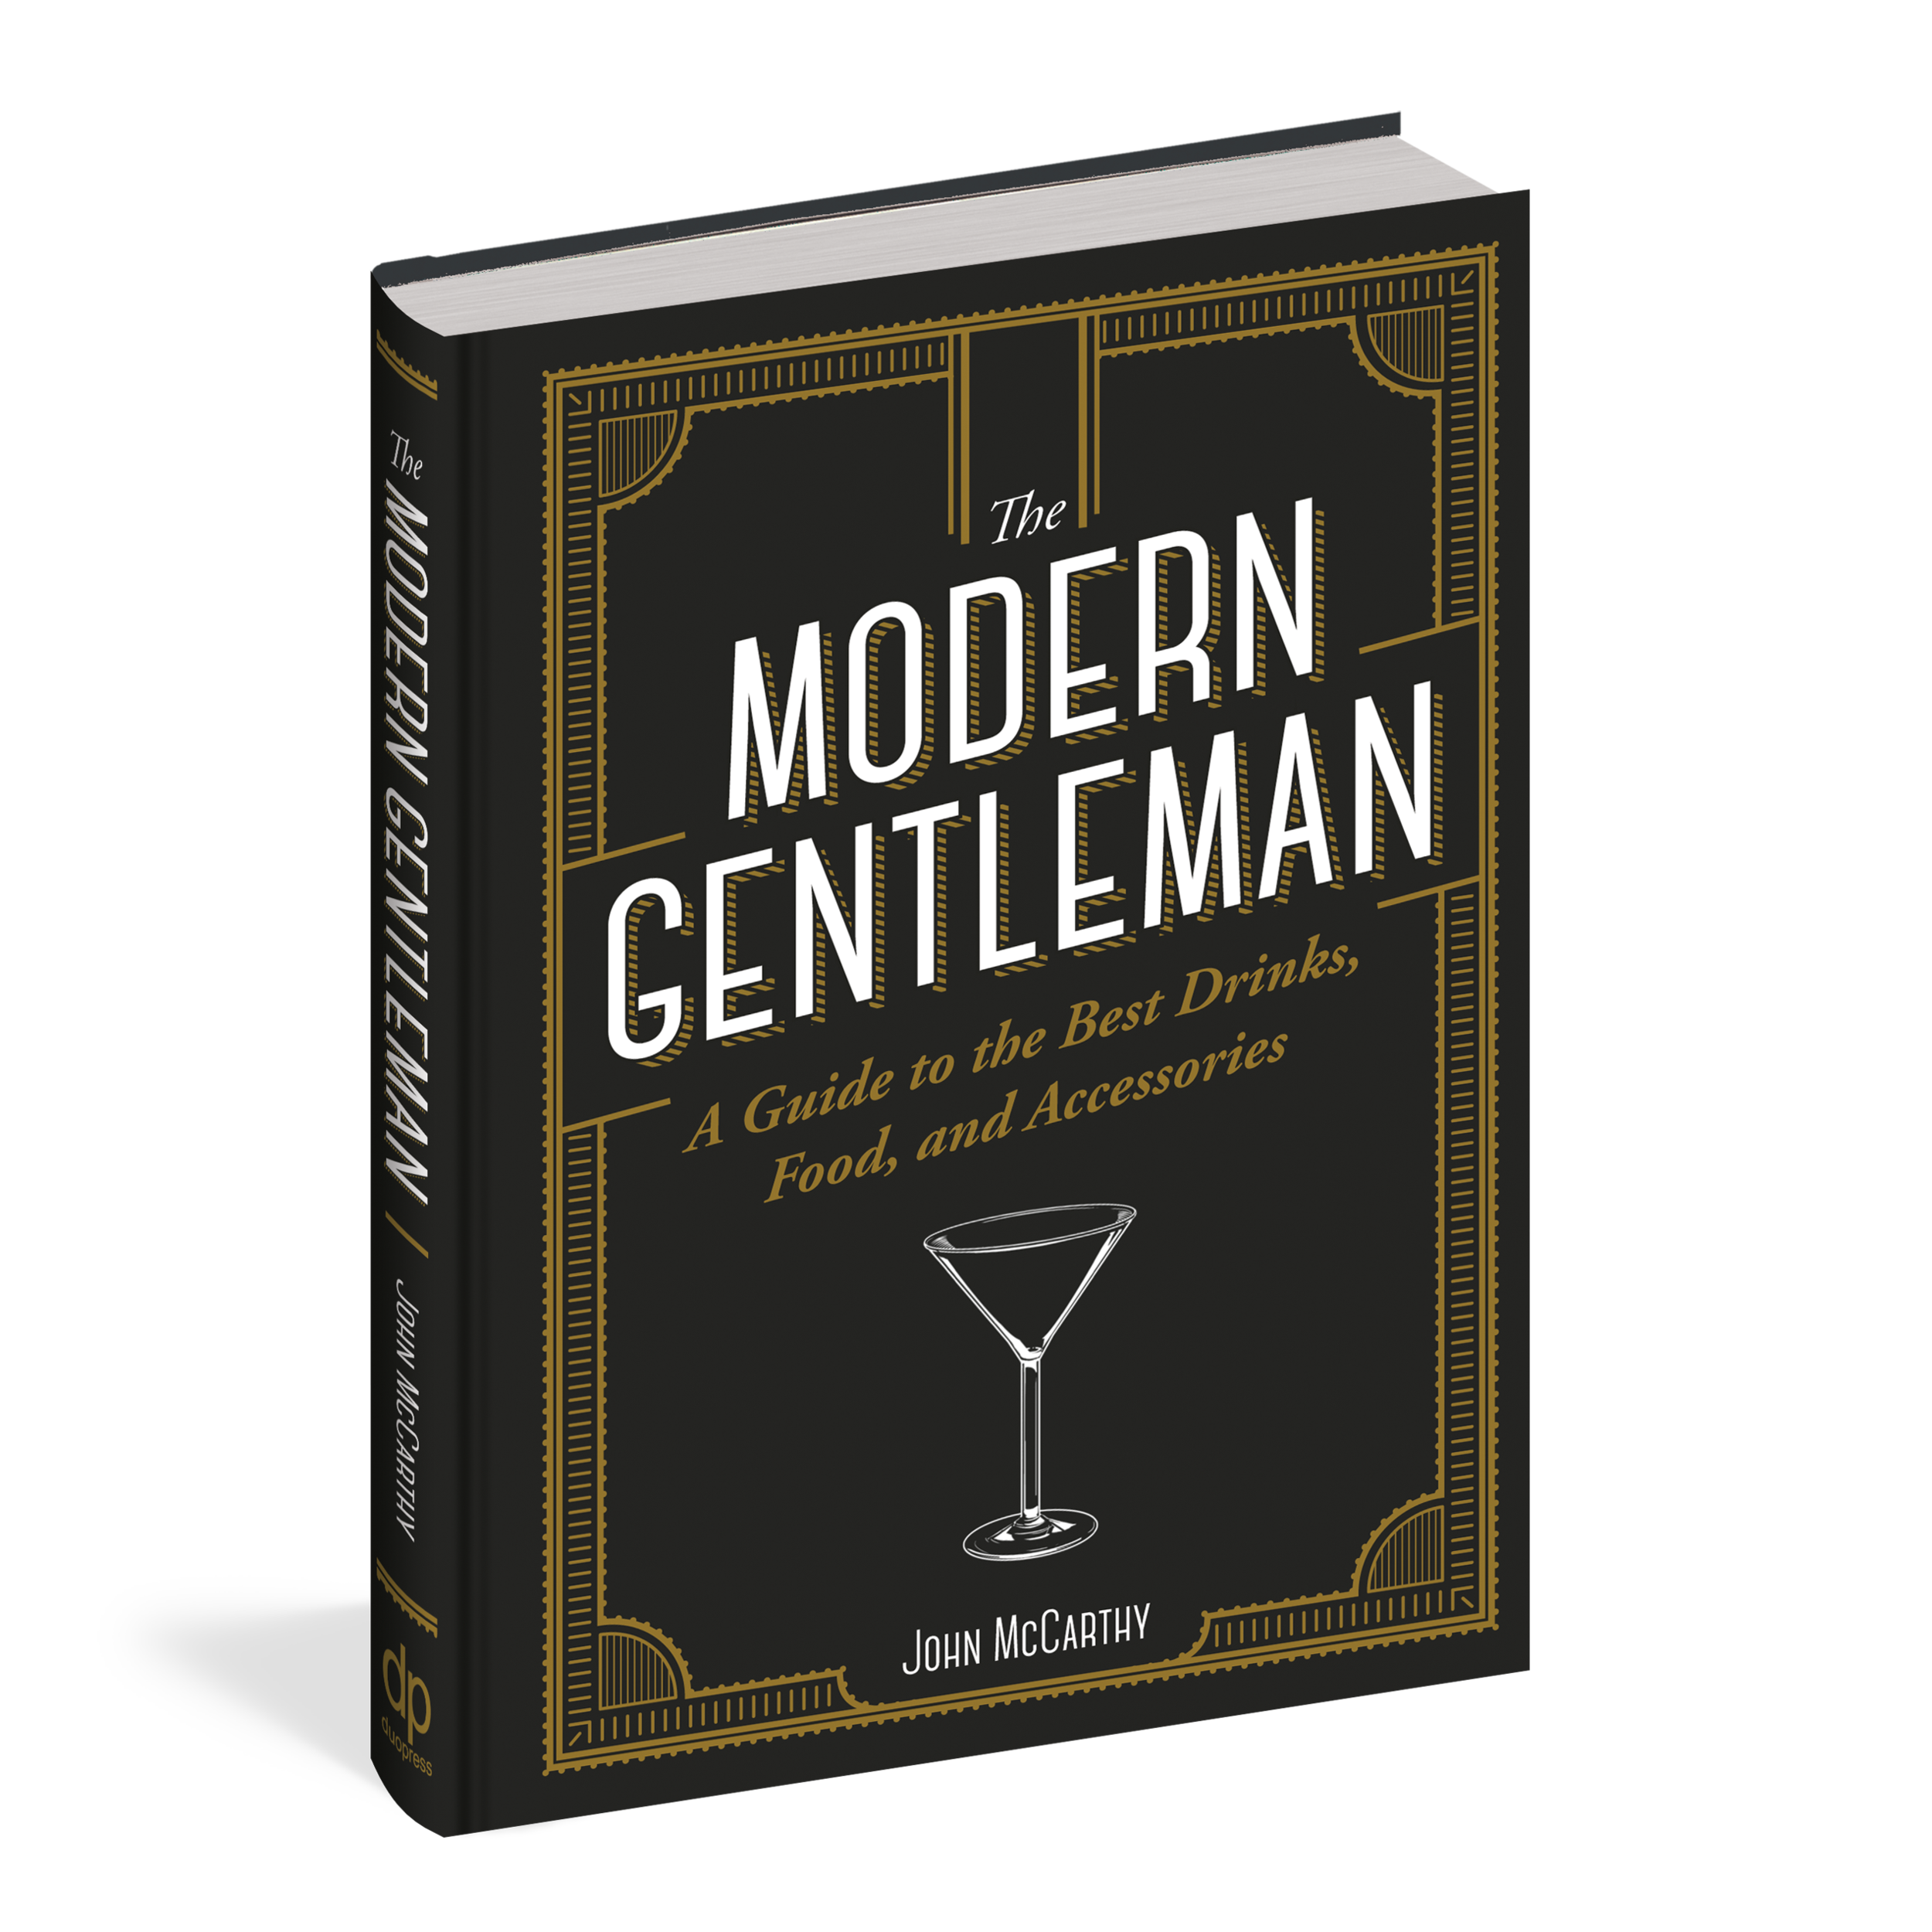 The Modern Gentleman: The Guide to the Best Food, Drinks, and Accessories (Copy) (Copy) (Copy) (Copy) (Copy)